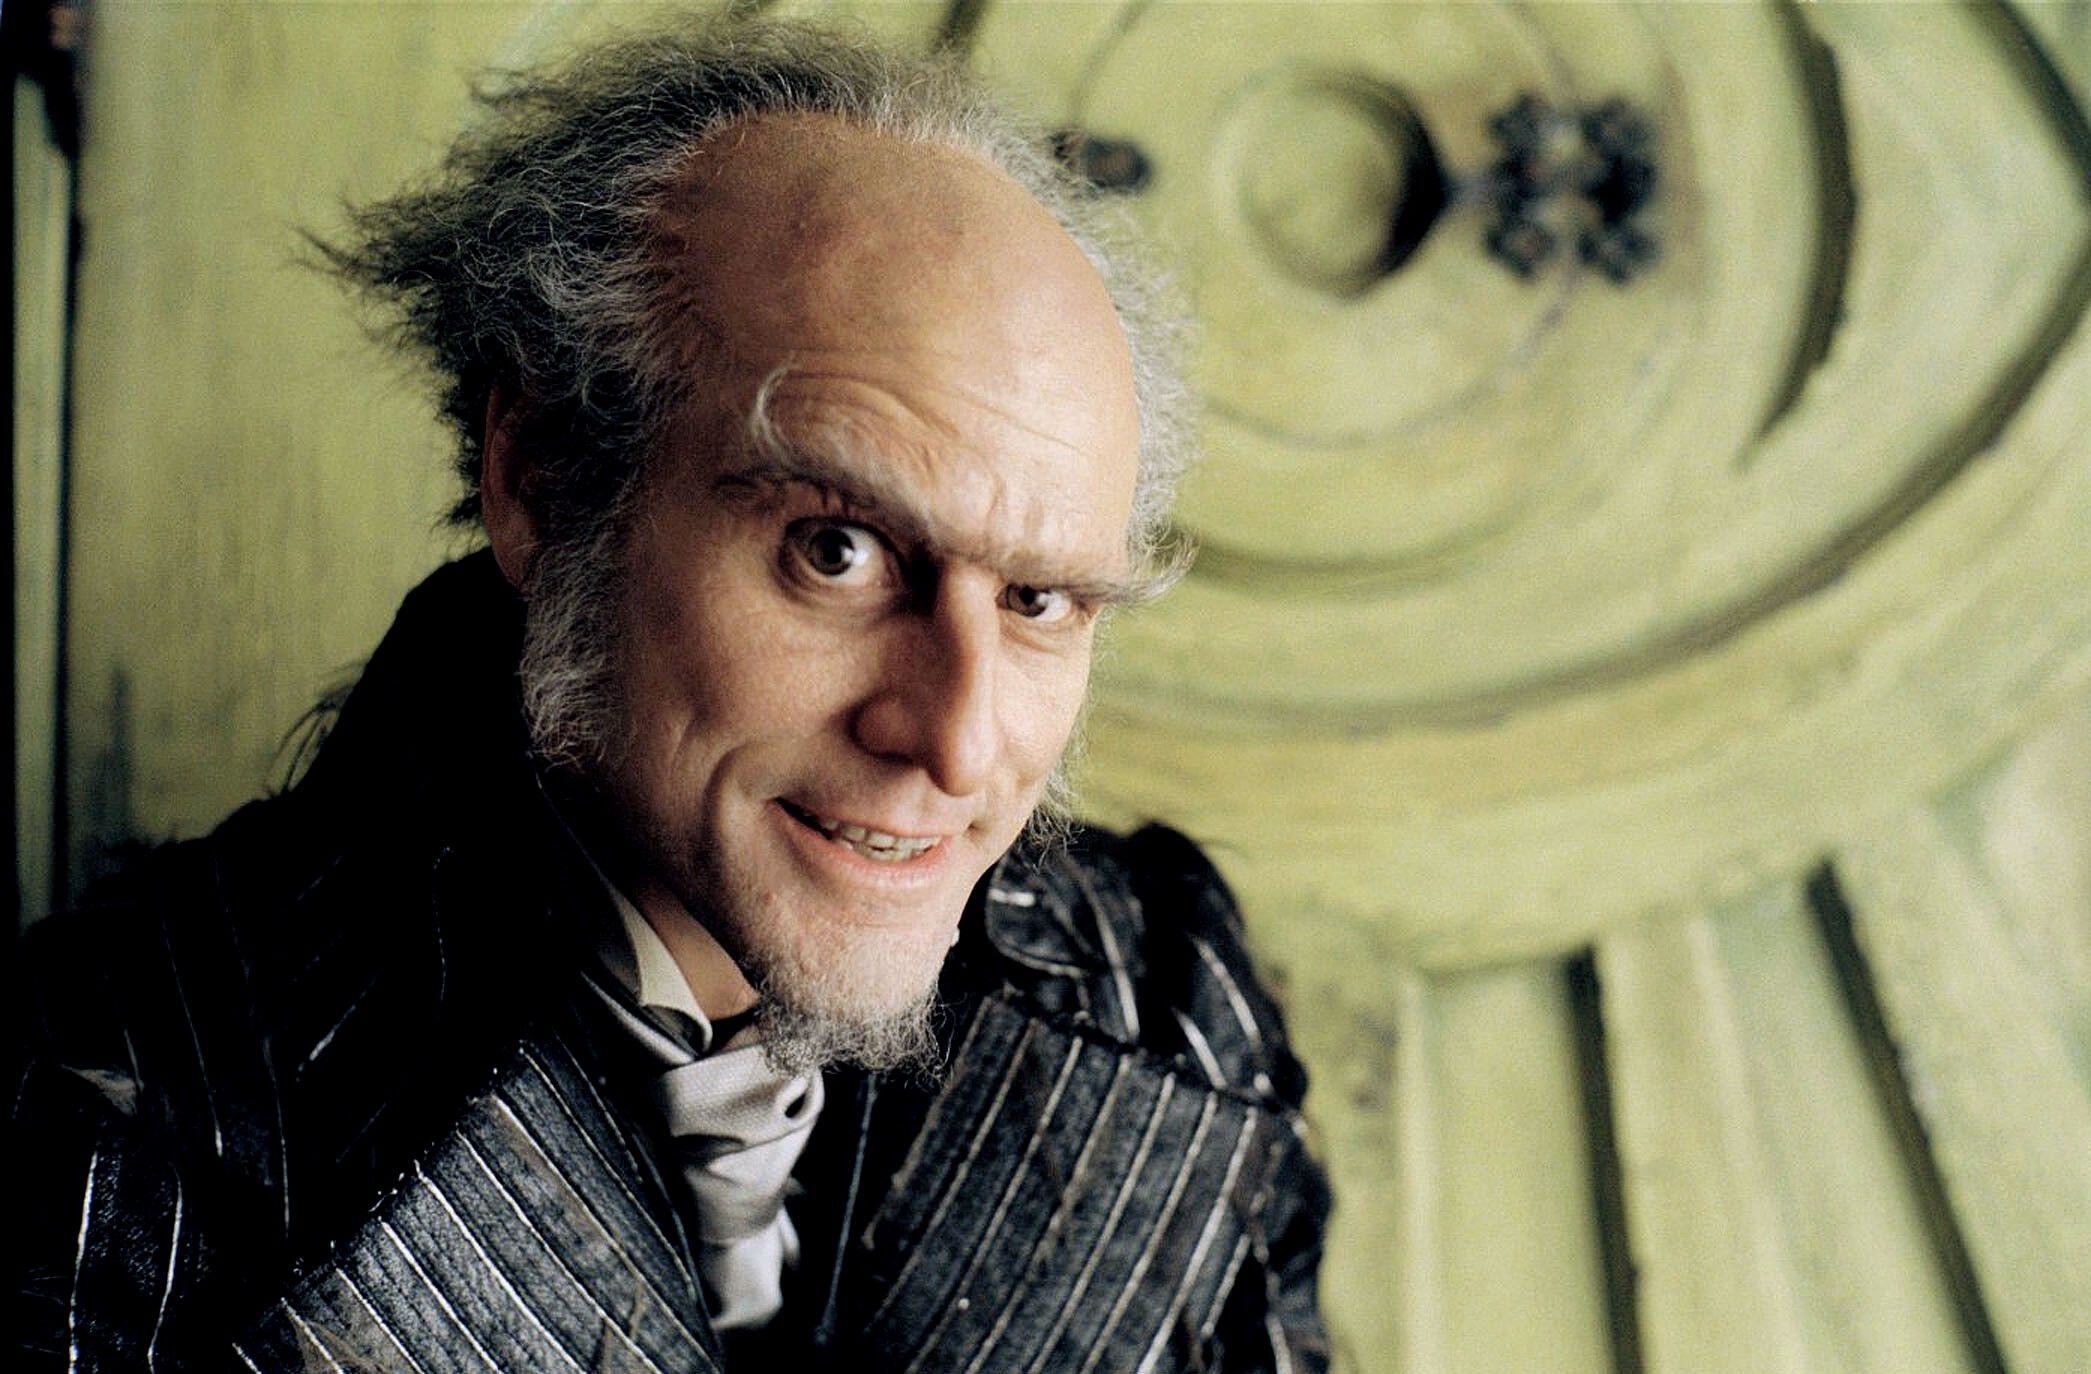 Jim as Count Olaf